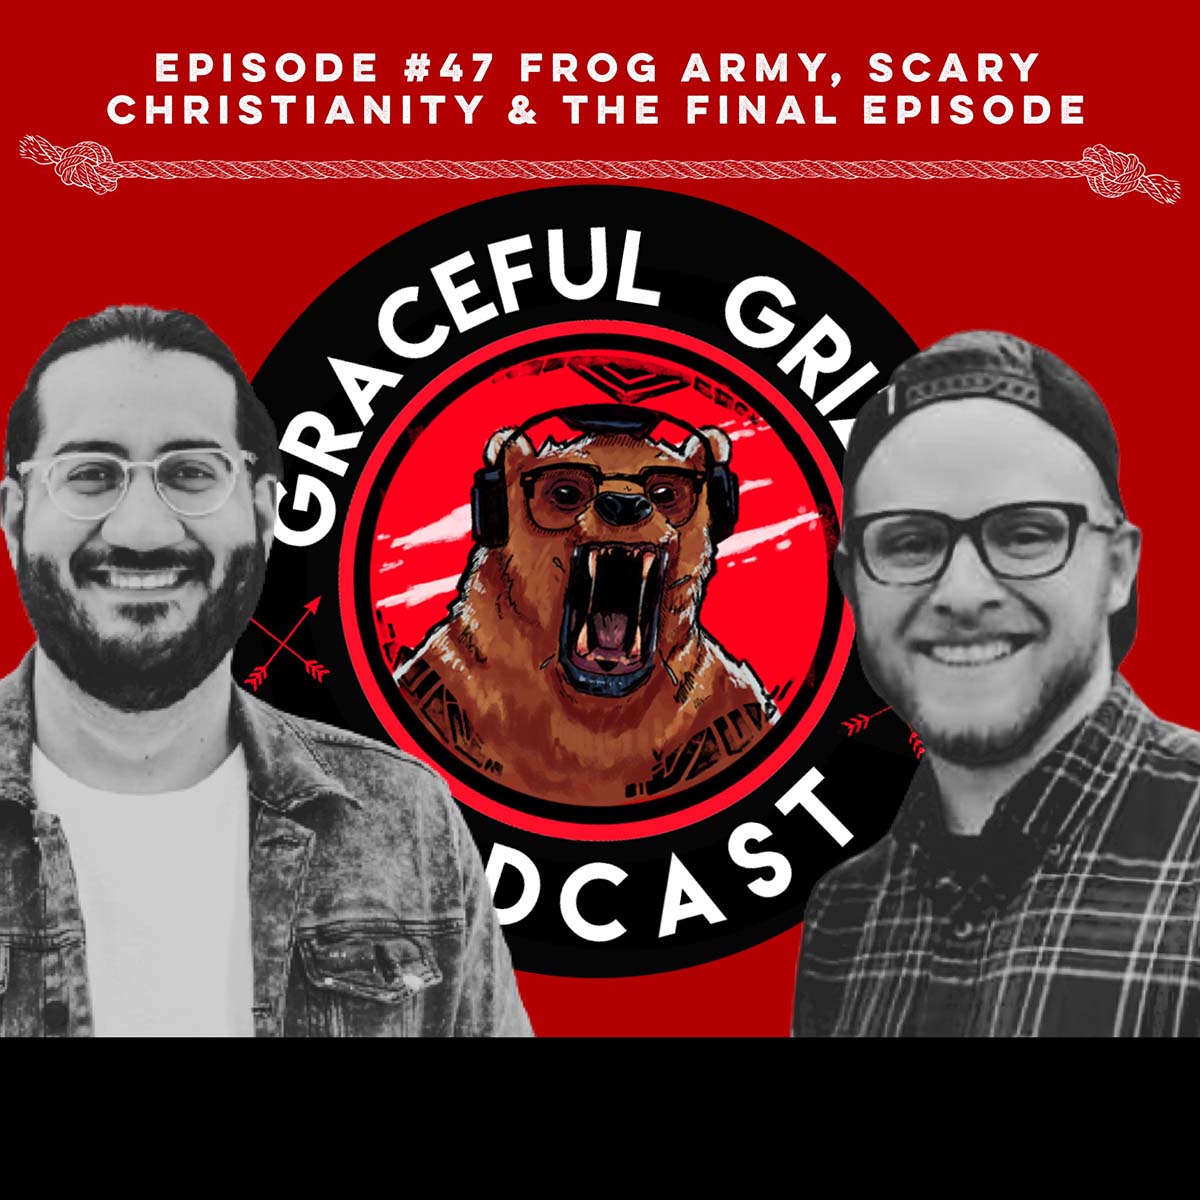 Episode 47 - Graceful Grizzly Podcast